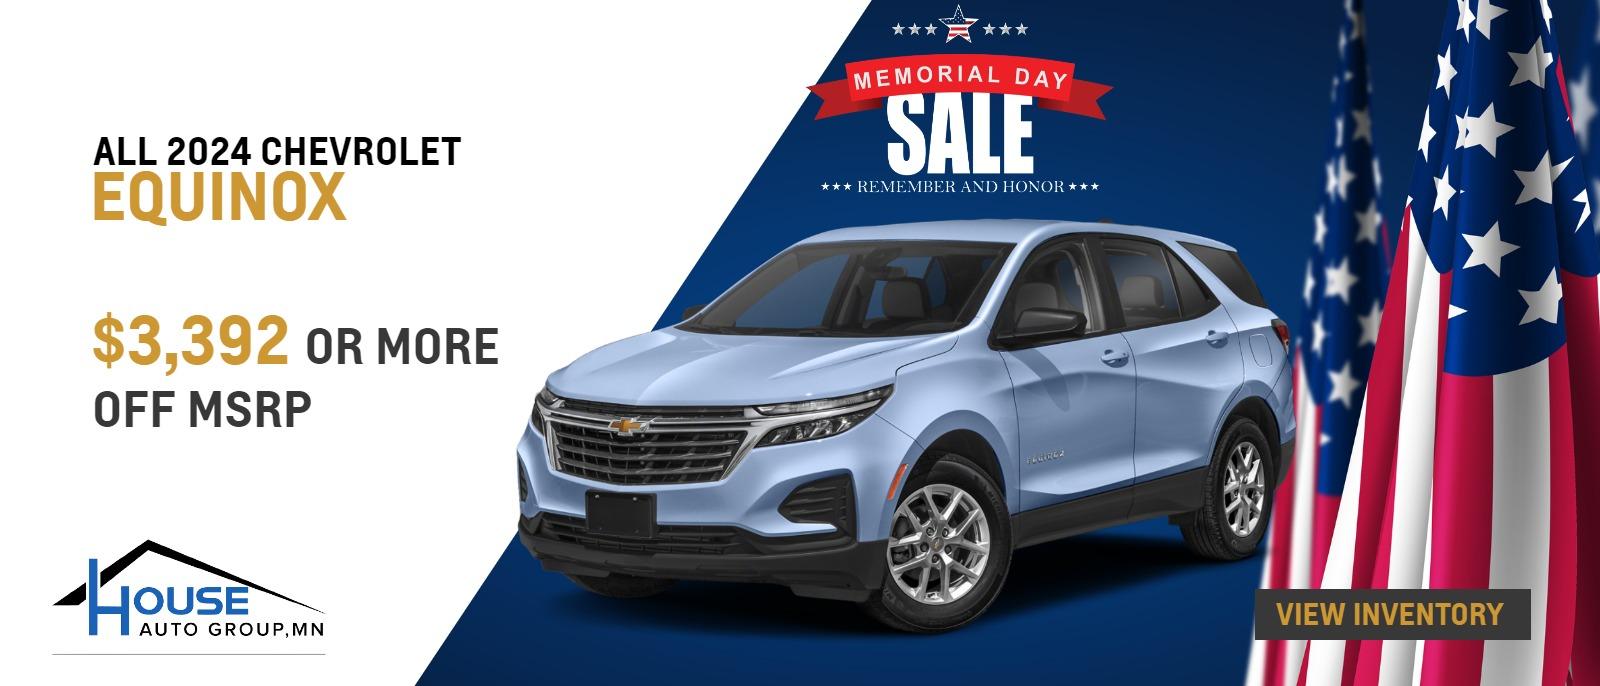 ALL 2024 Chevy Equinox - $3,392 Or More Off MSRP!